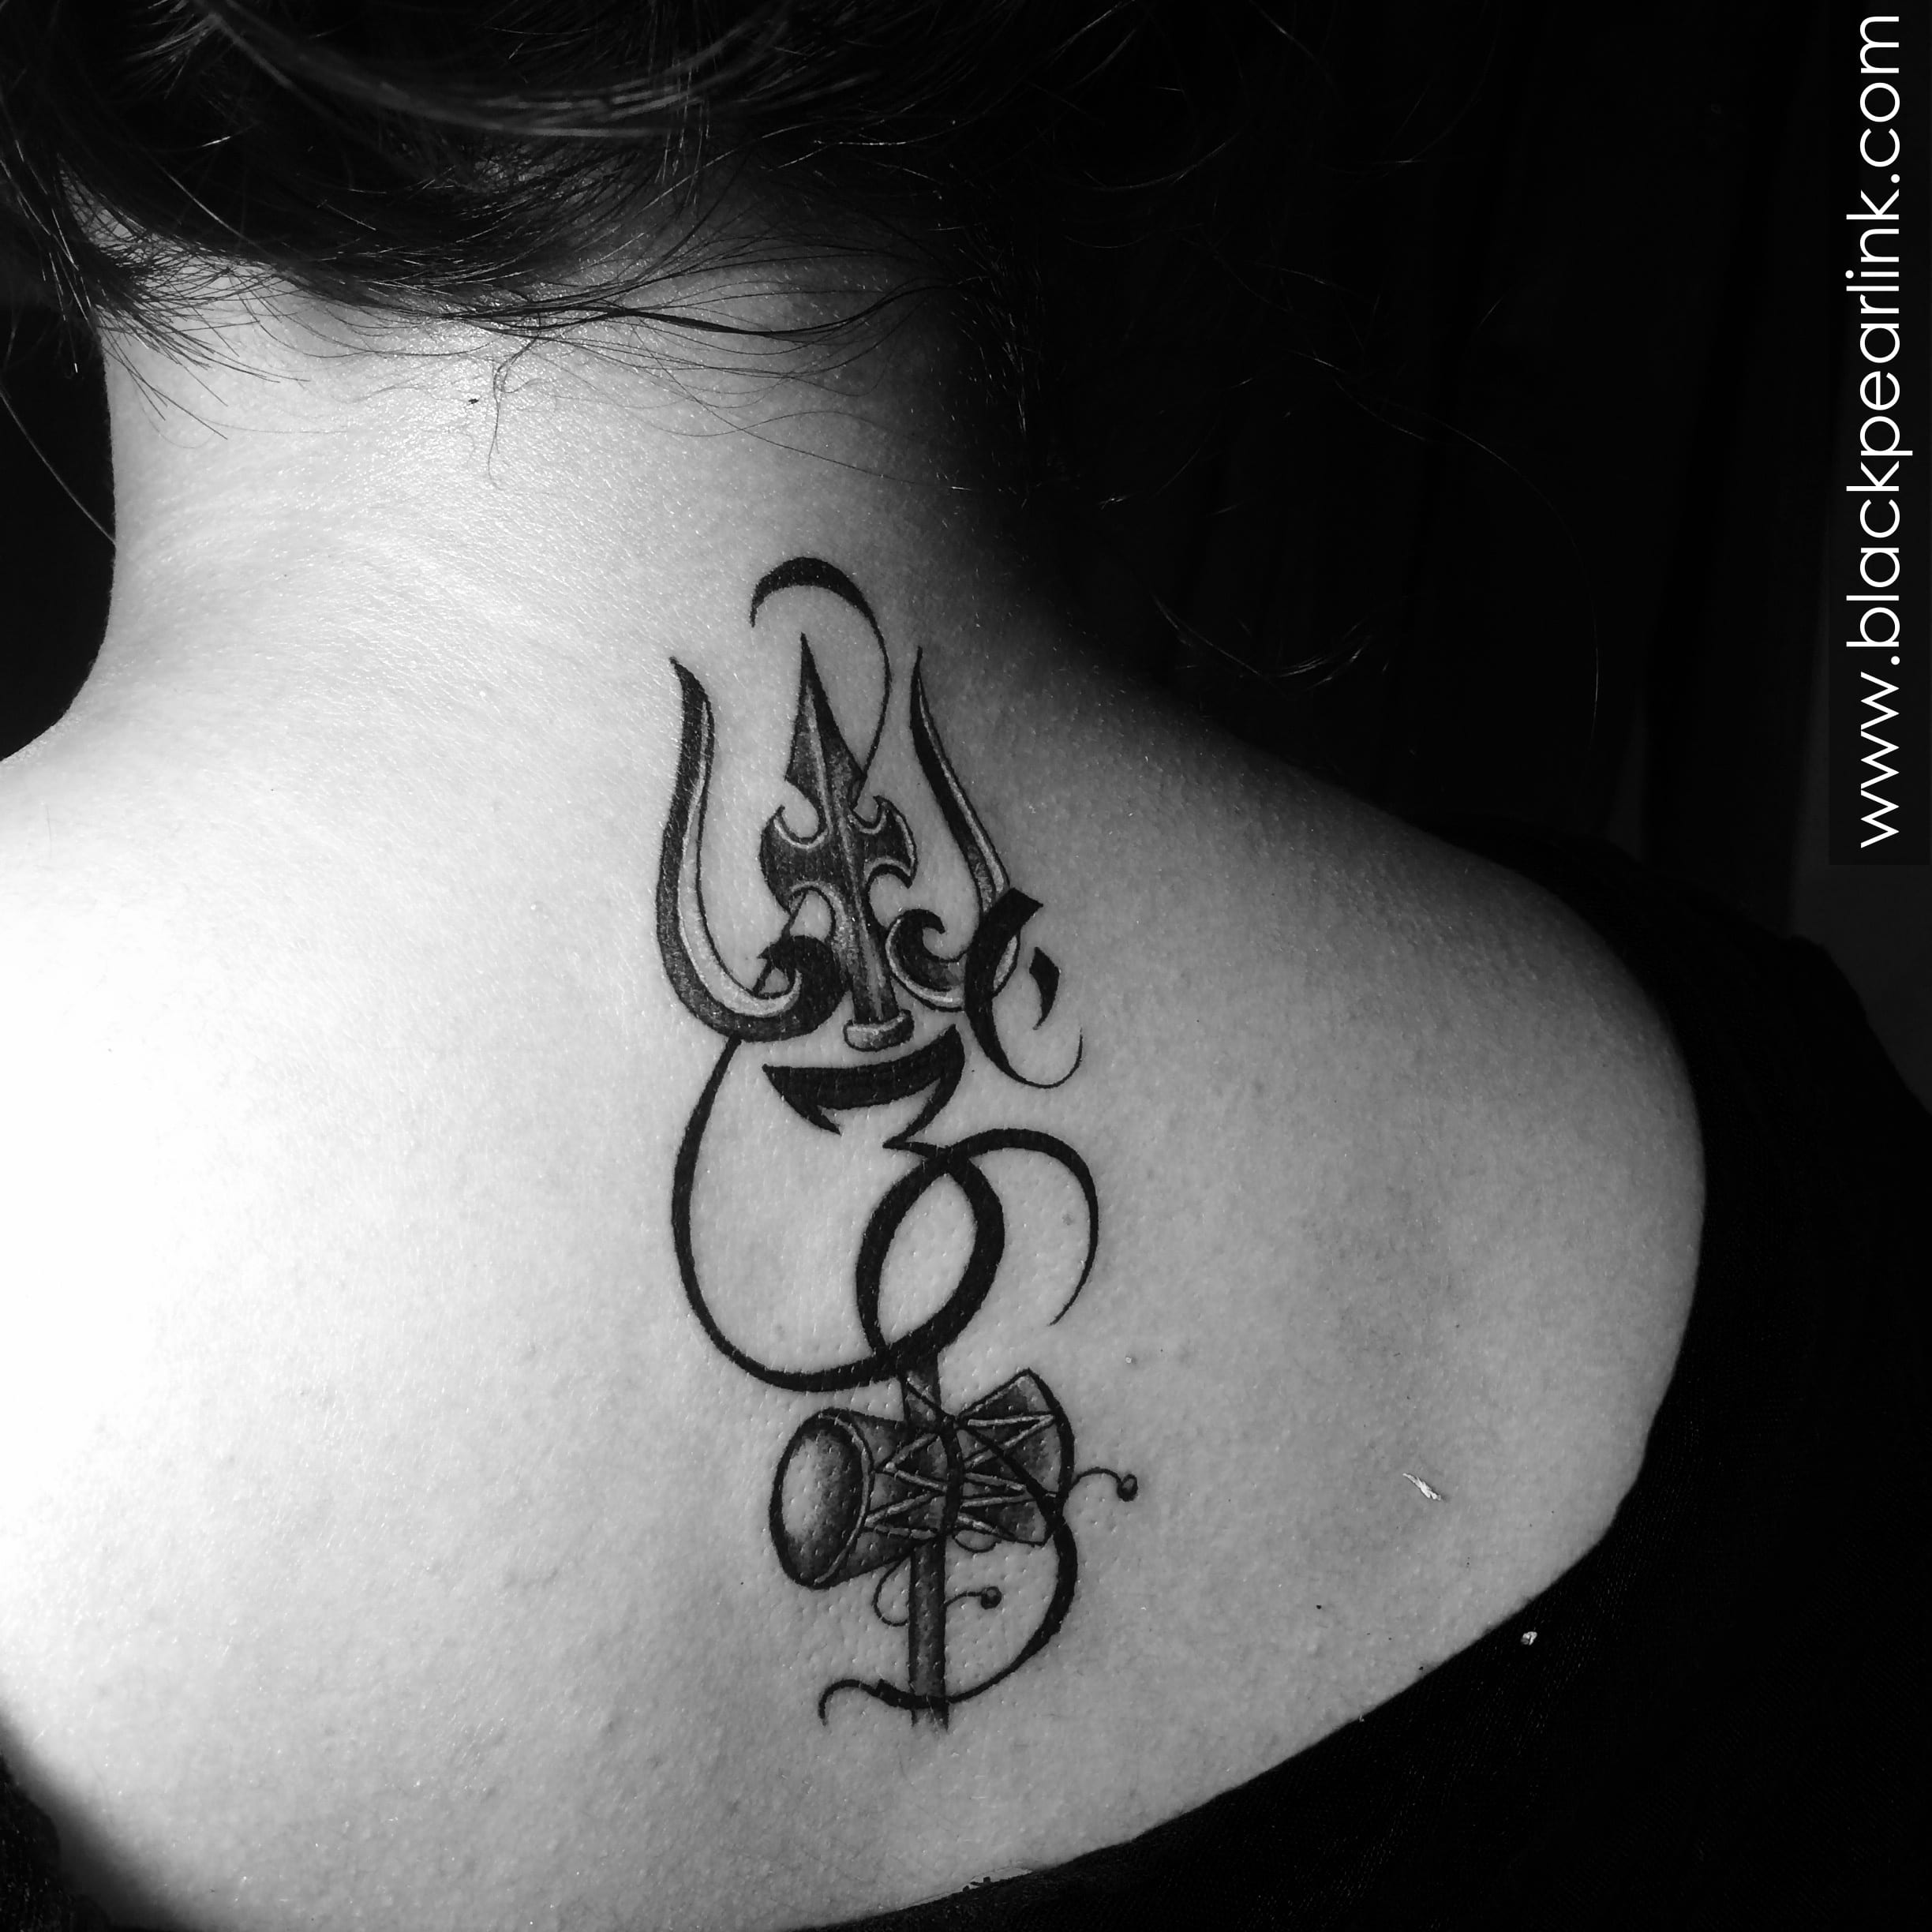 Intricate Dragon and Snake Tattoo